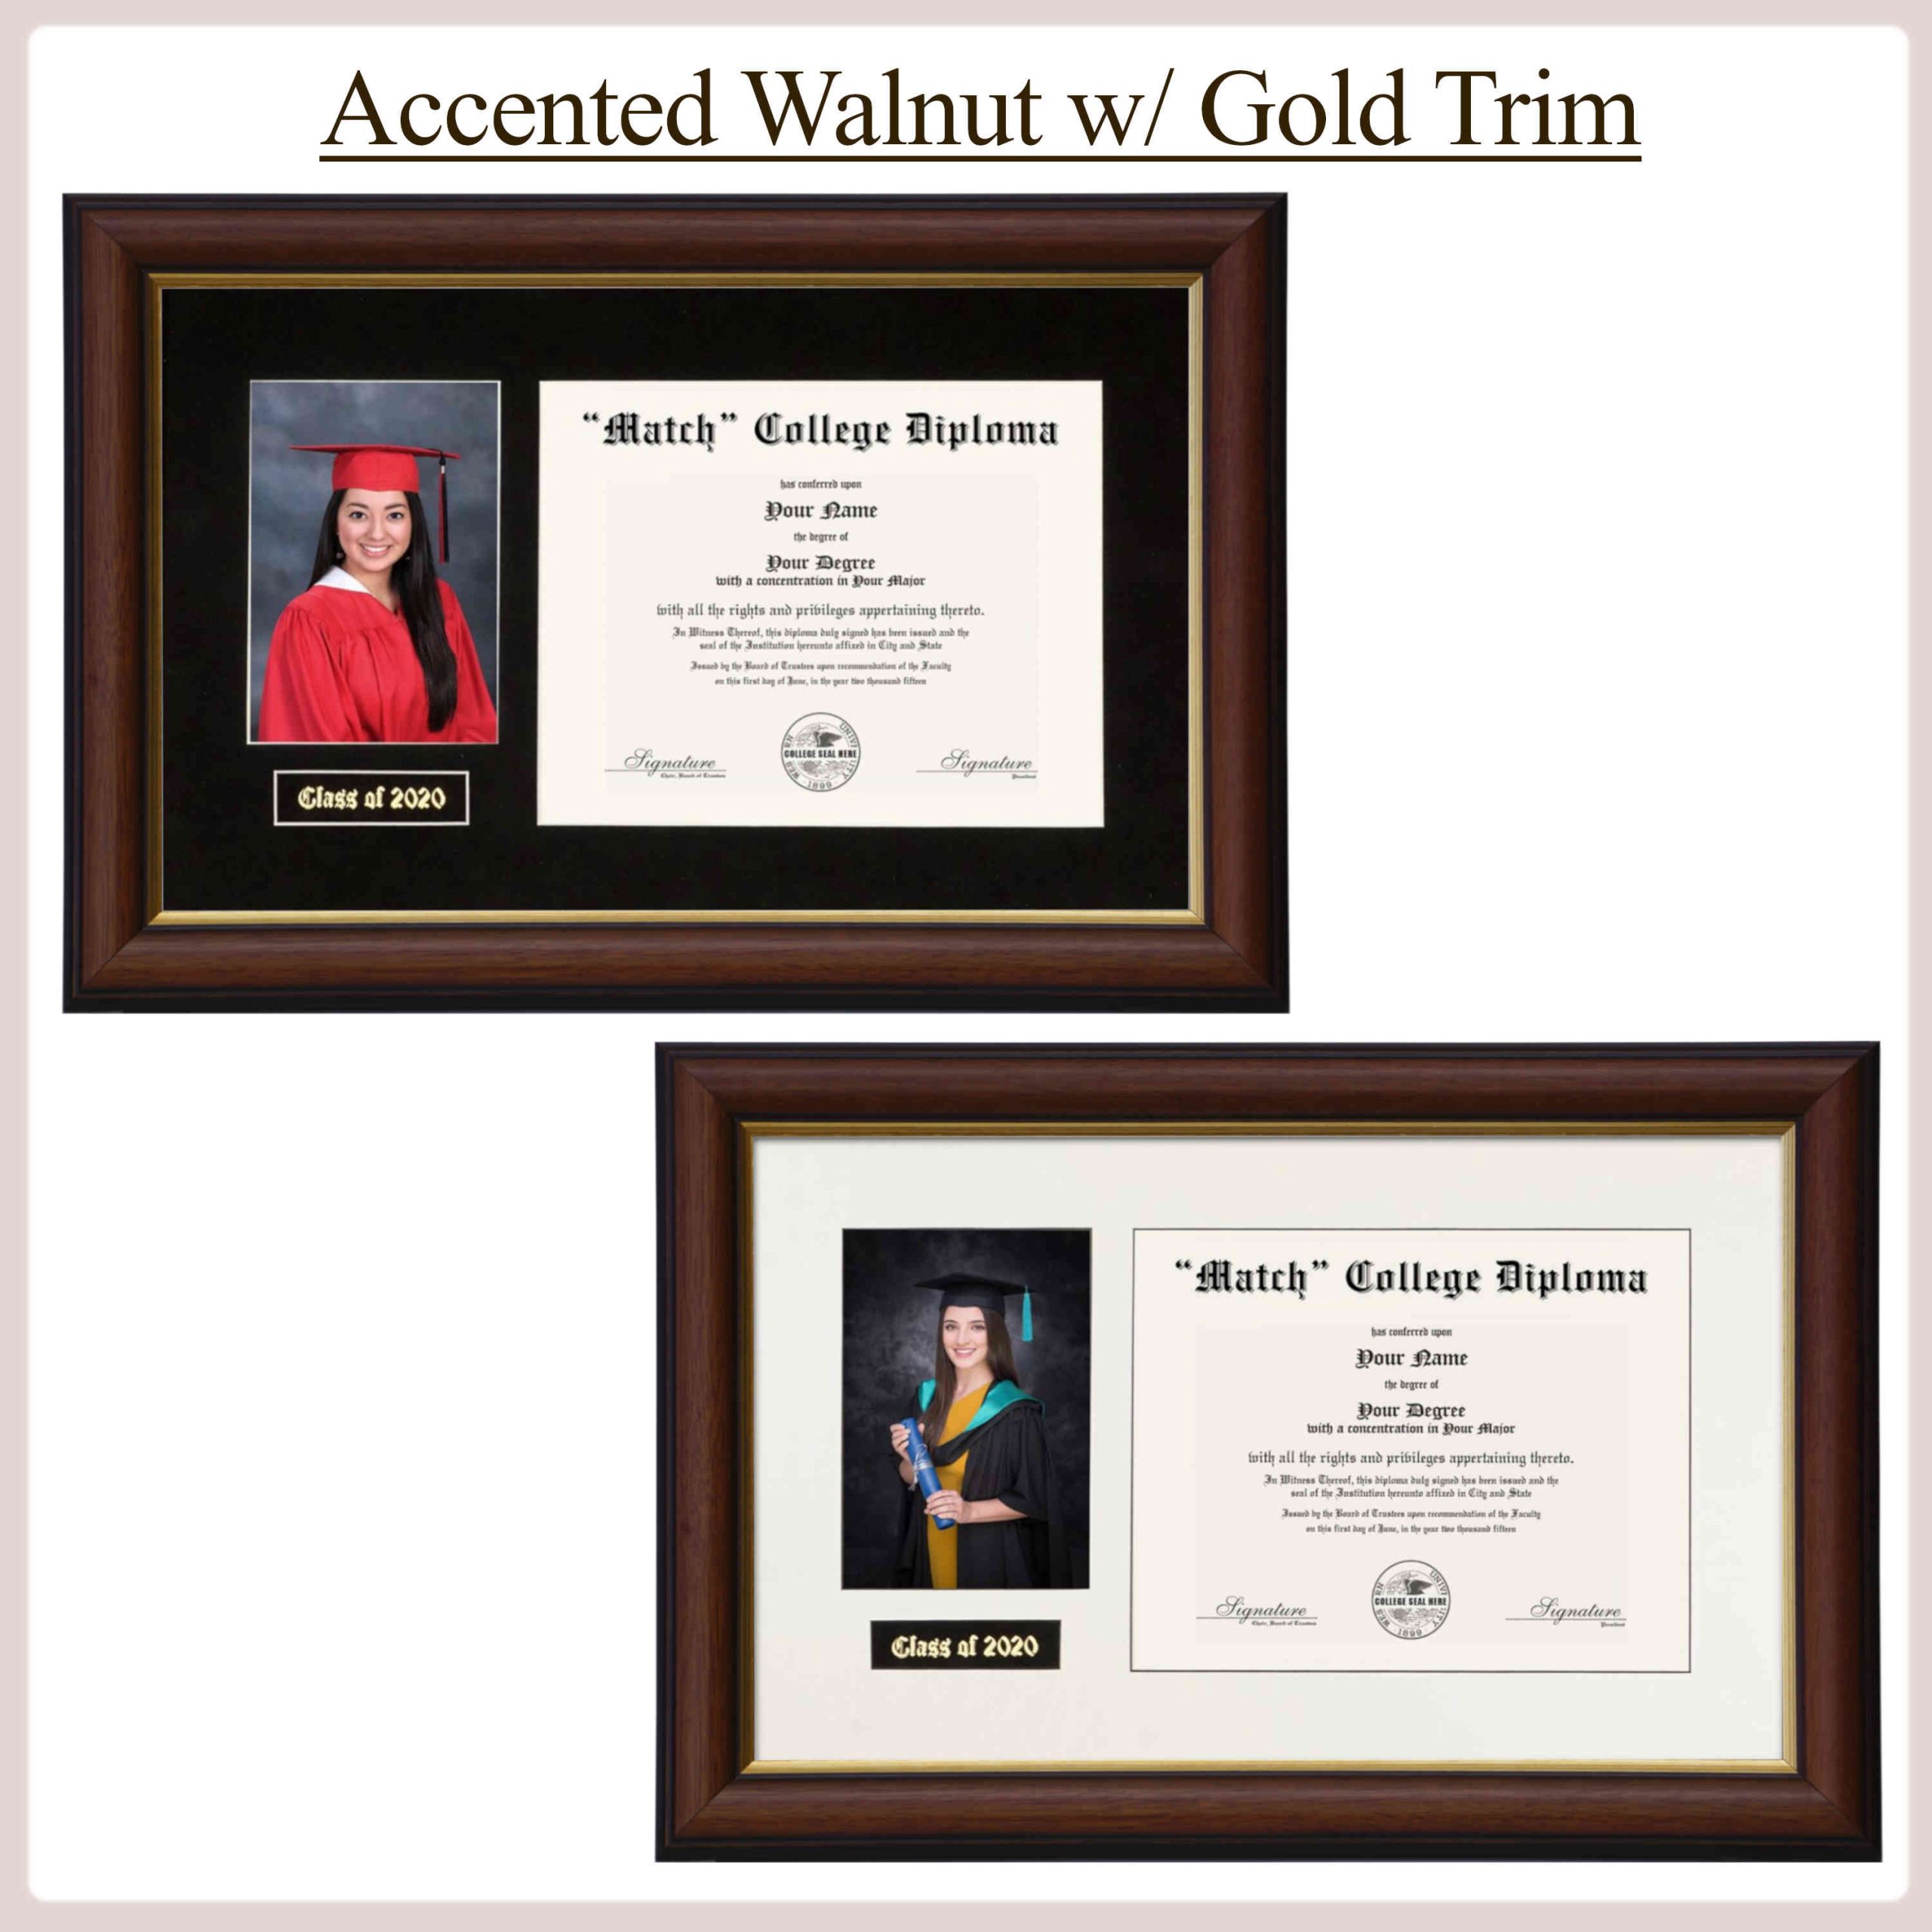 Click to Buy Accented Walnut Diploma Frame on Etsy!